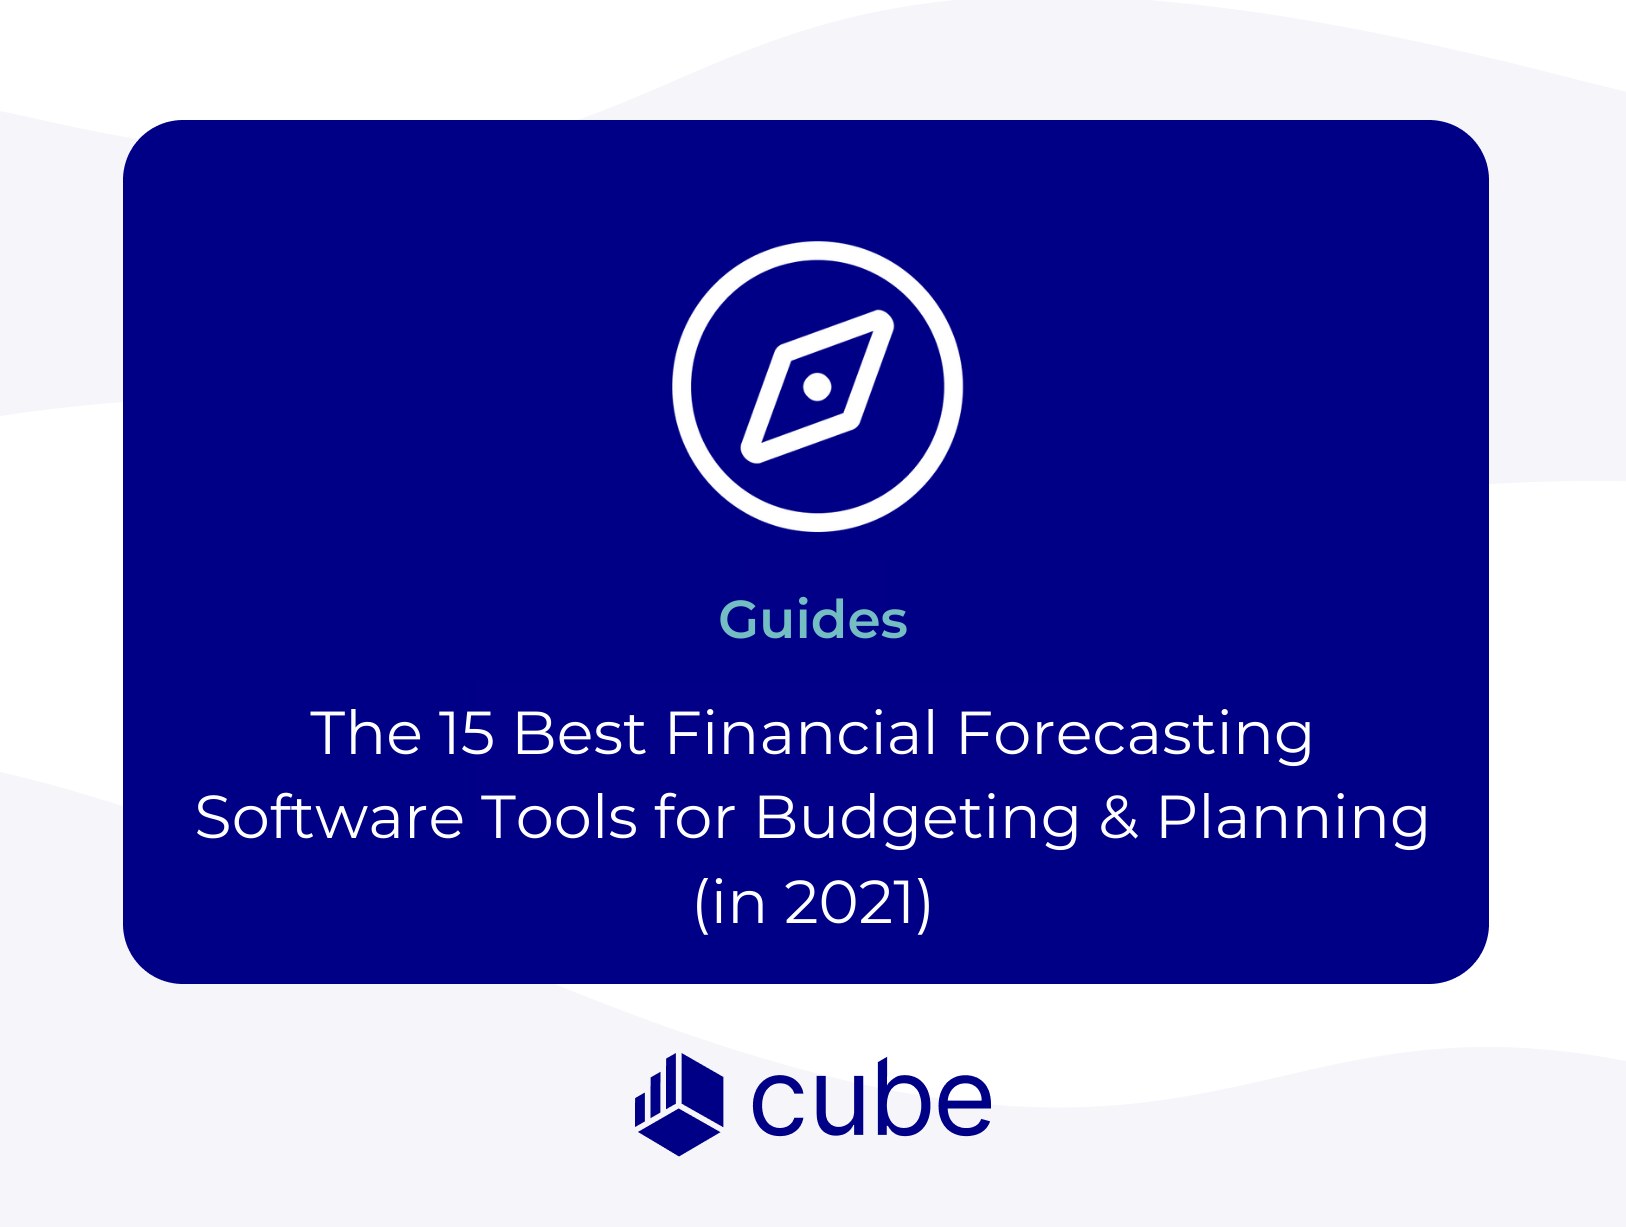 [Updated] The 15 Best Financial Forecasting Software Tools for Budgeting & Planning (in 2022)